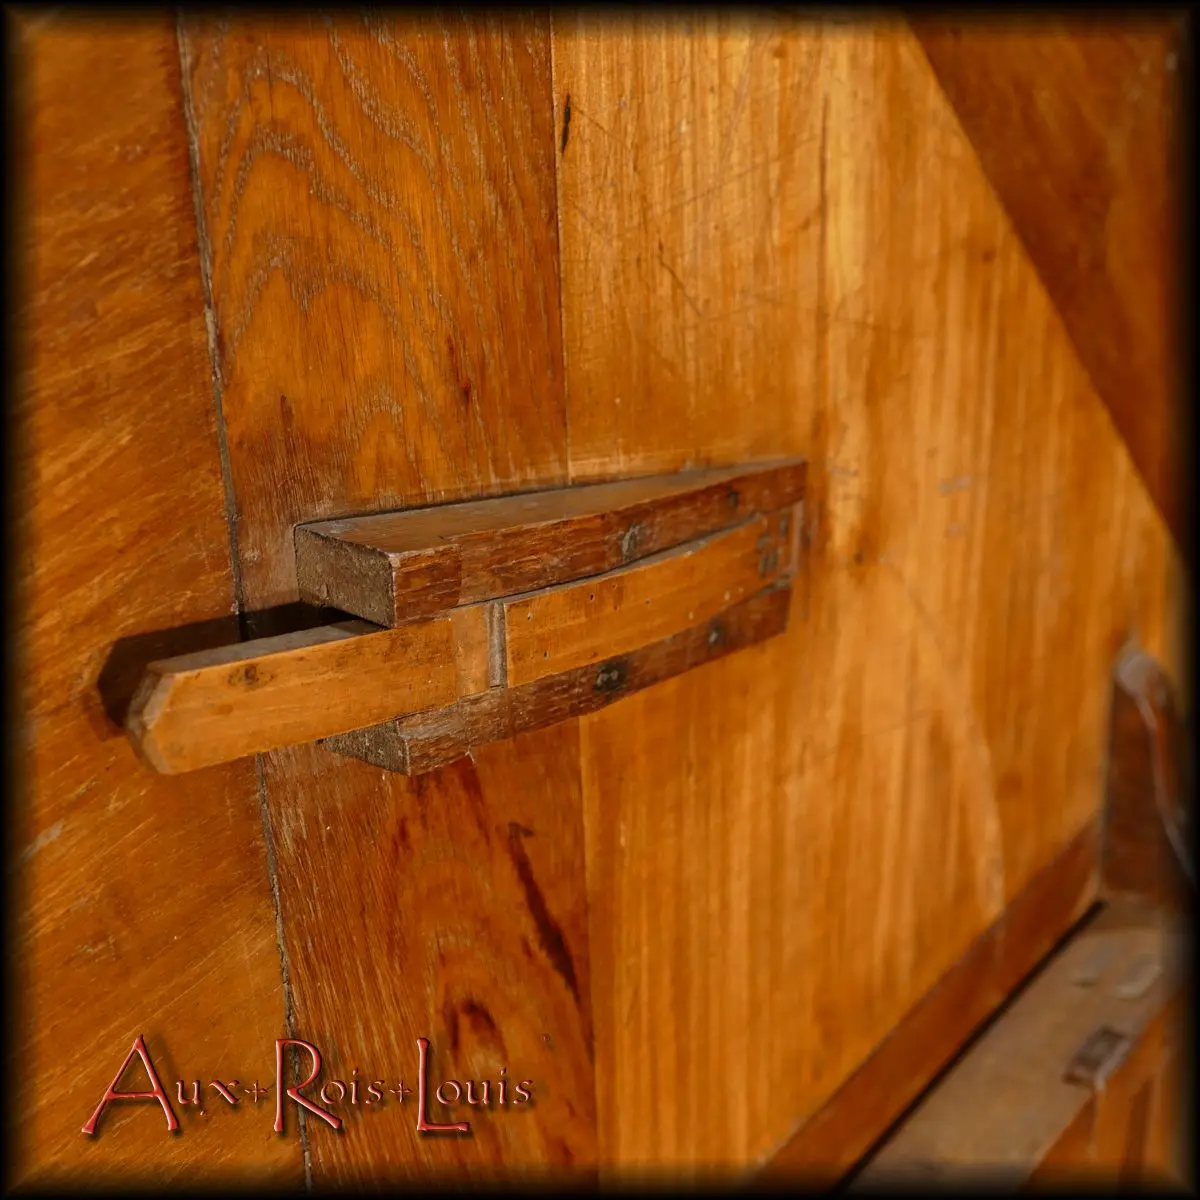 It is this wooden spring that engages in the lyre after it has rotated 90° to hold the table top in place.